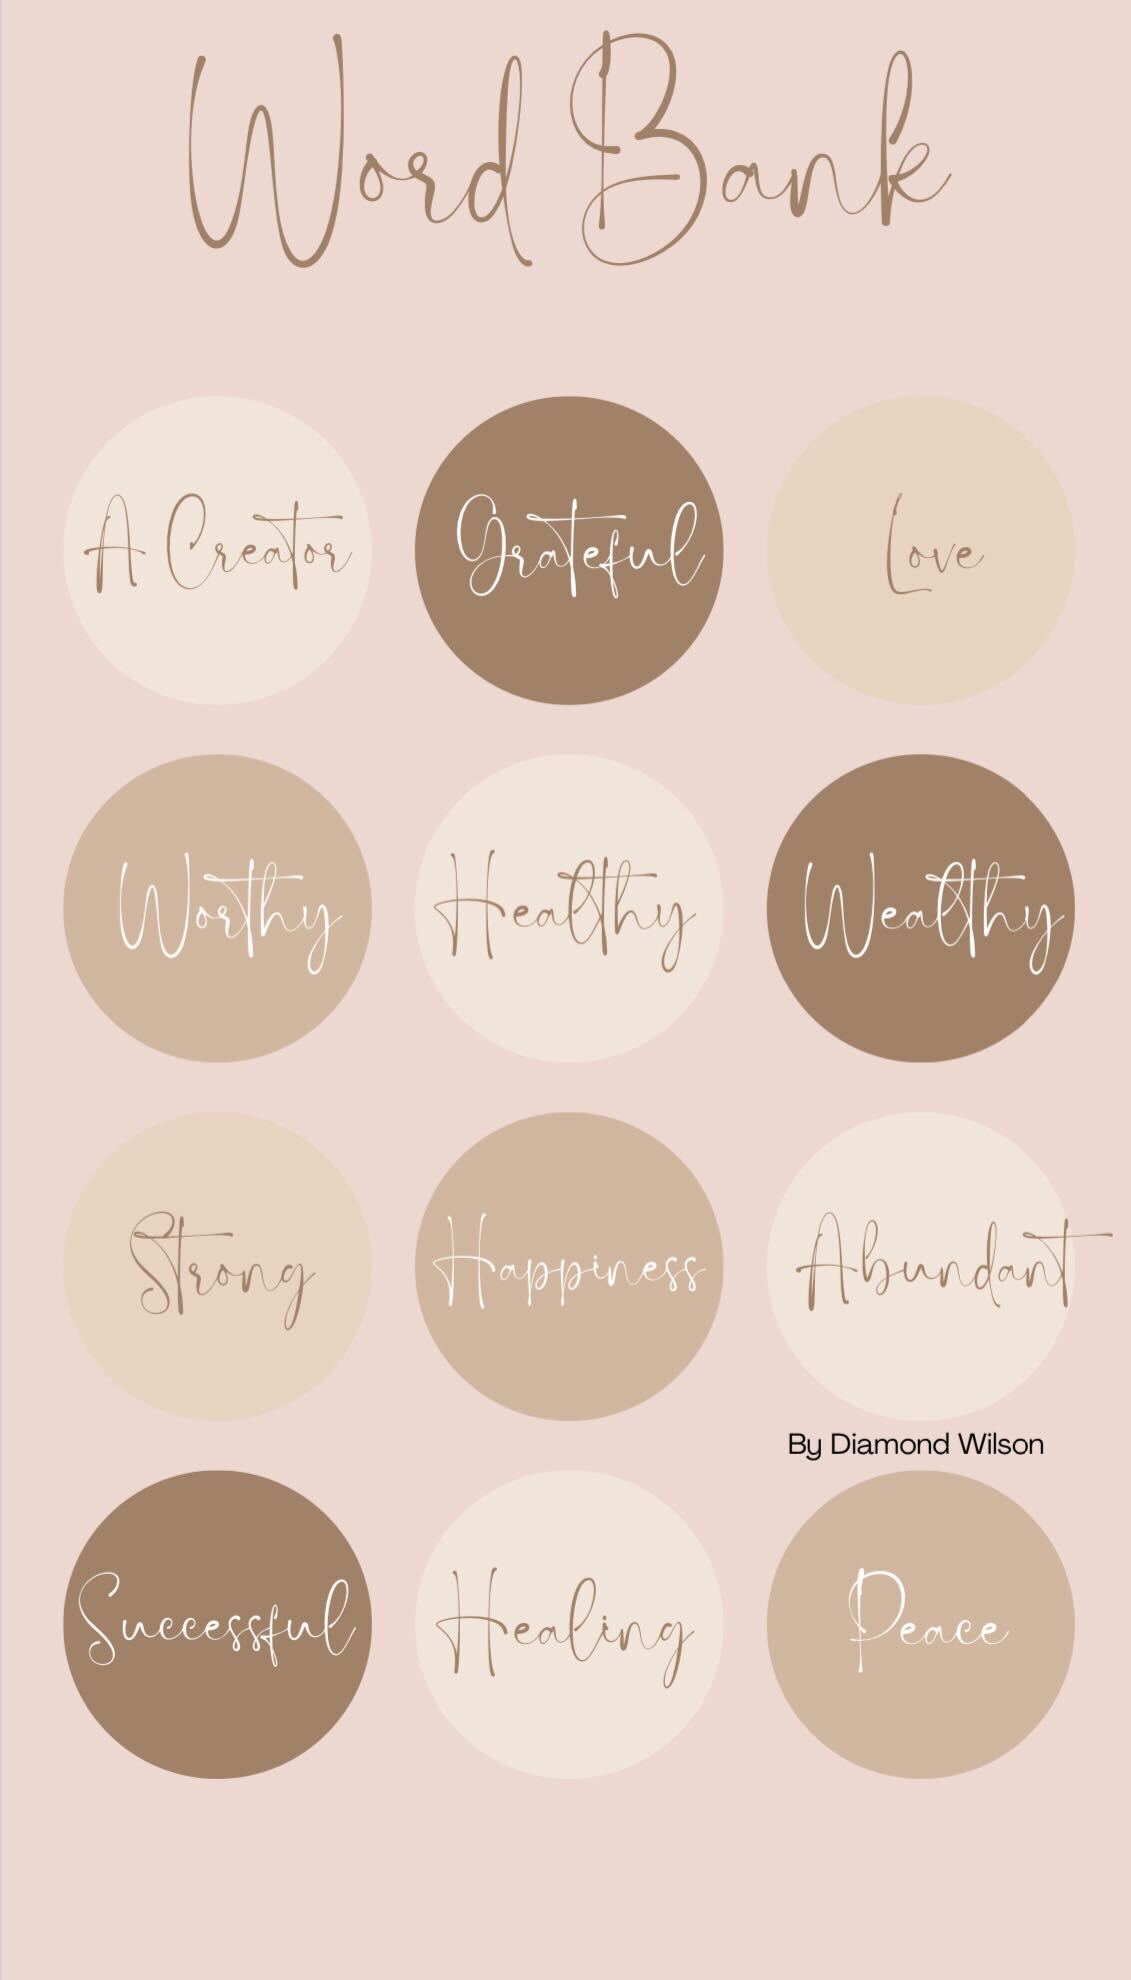 *Nude background with brown, light brown and tan circles. Inside the circles are descriptive words written in brown and white text overlay: “Word Bank: A Creator, Grateful, Love, Worthy, Healthy, Wealthy, Strong, Happiness, Abundant, Successful, Healing, Peace”*